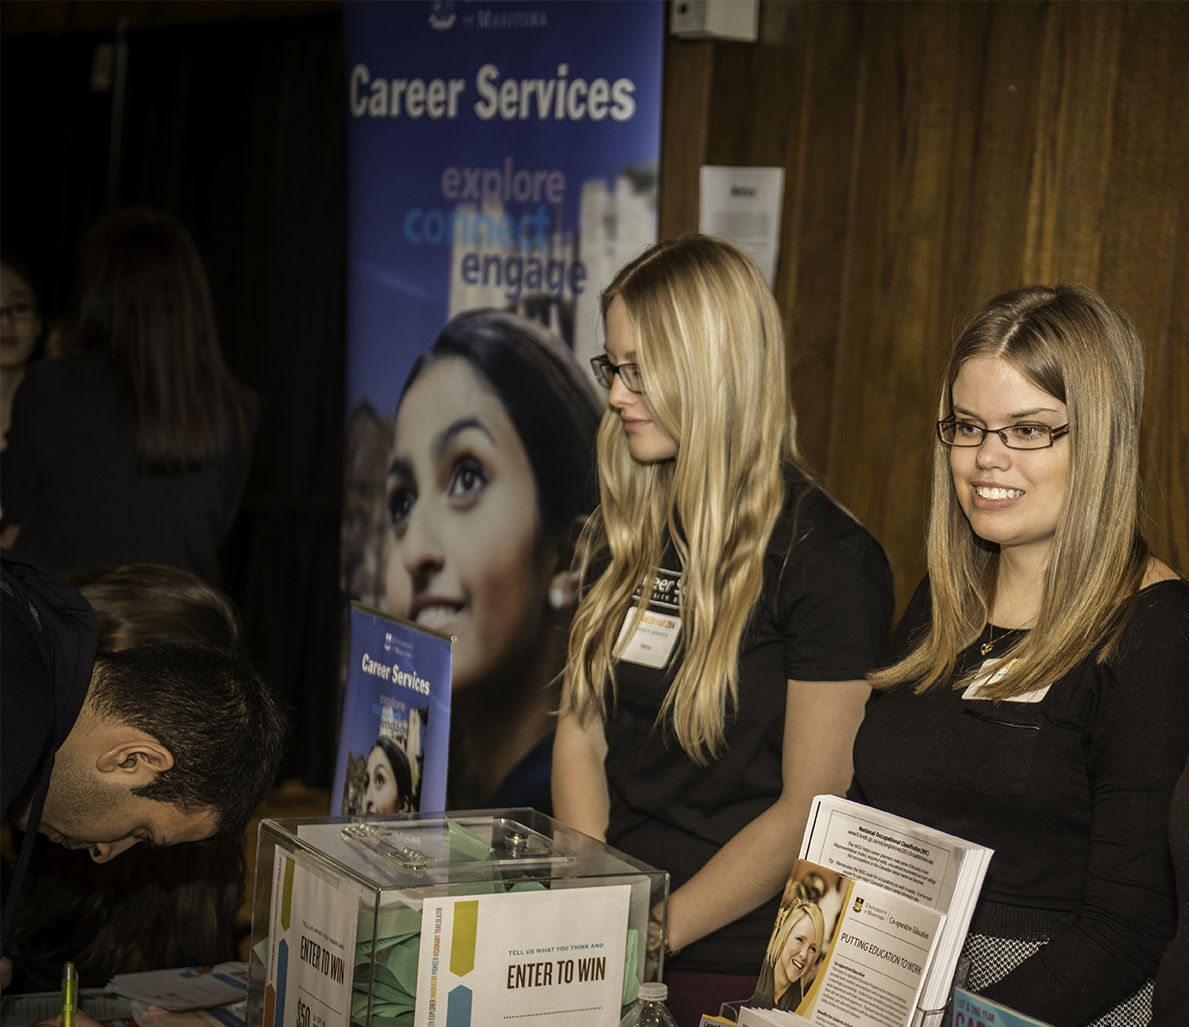 Career Services booth at Career Fair 2014